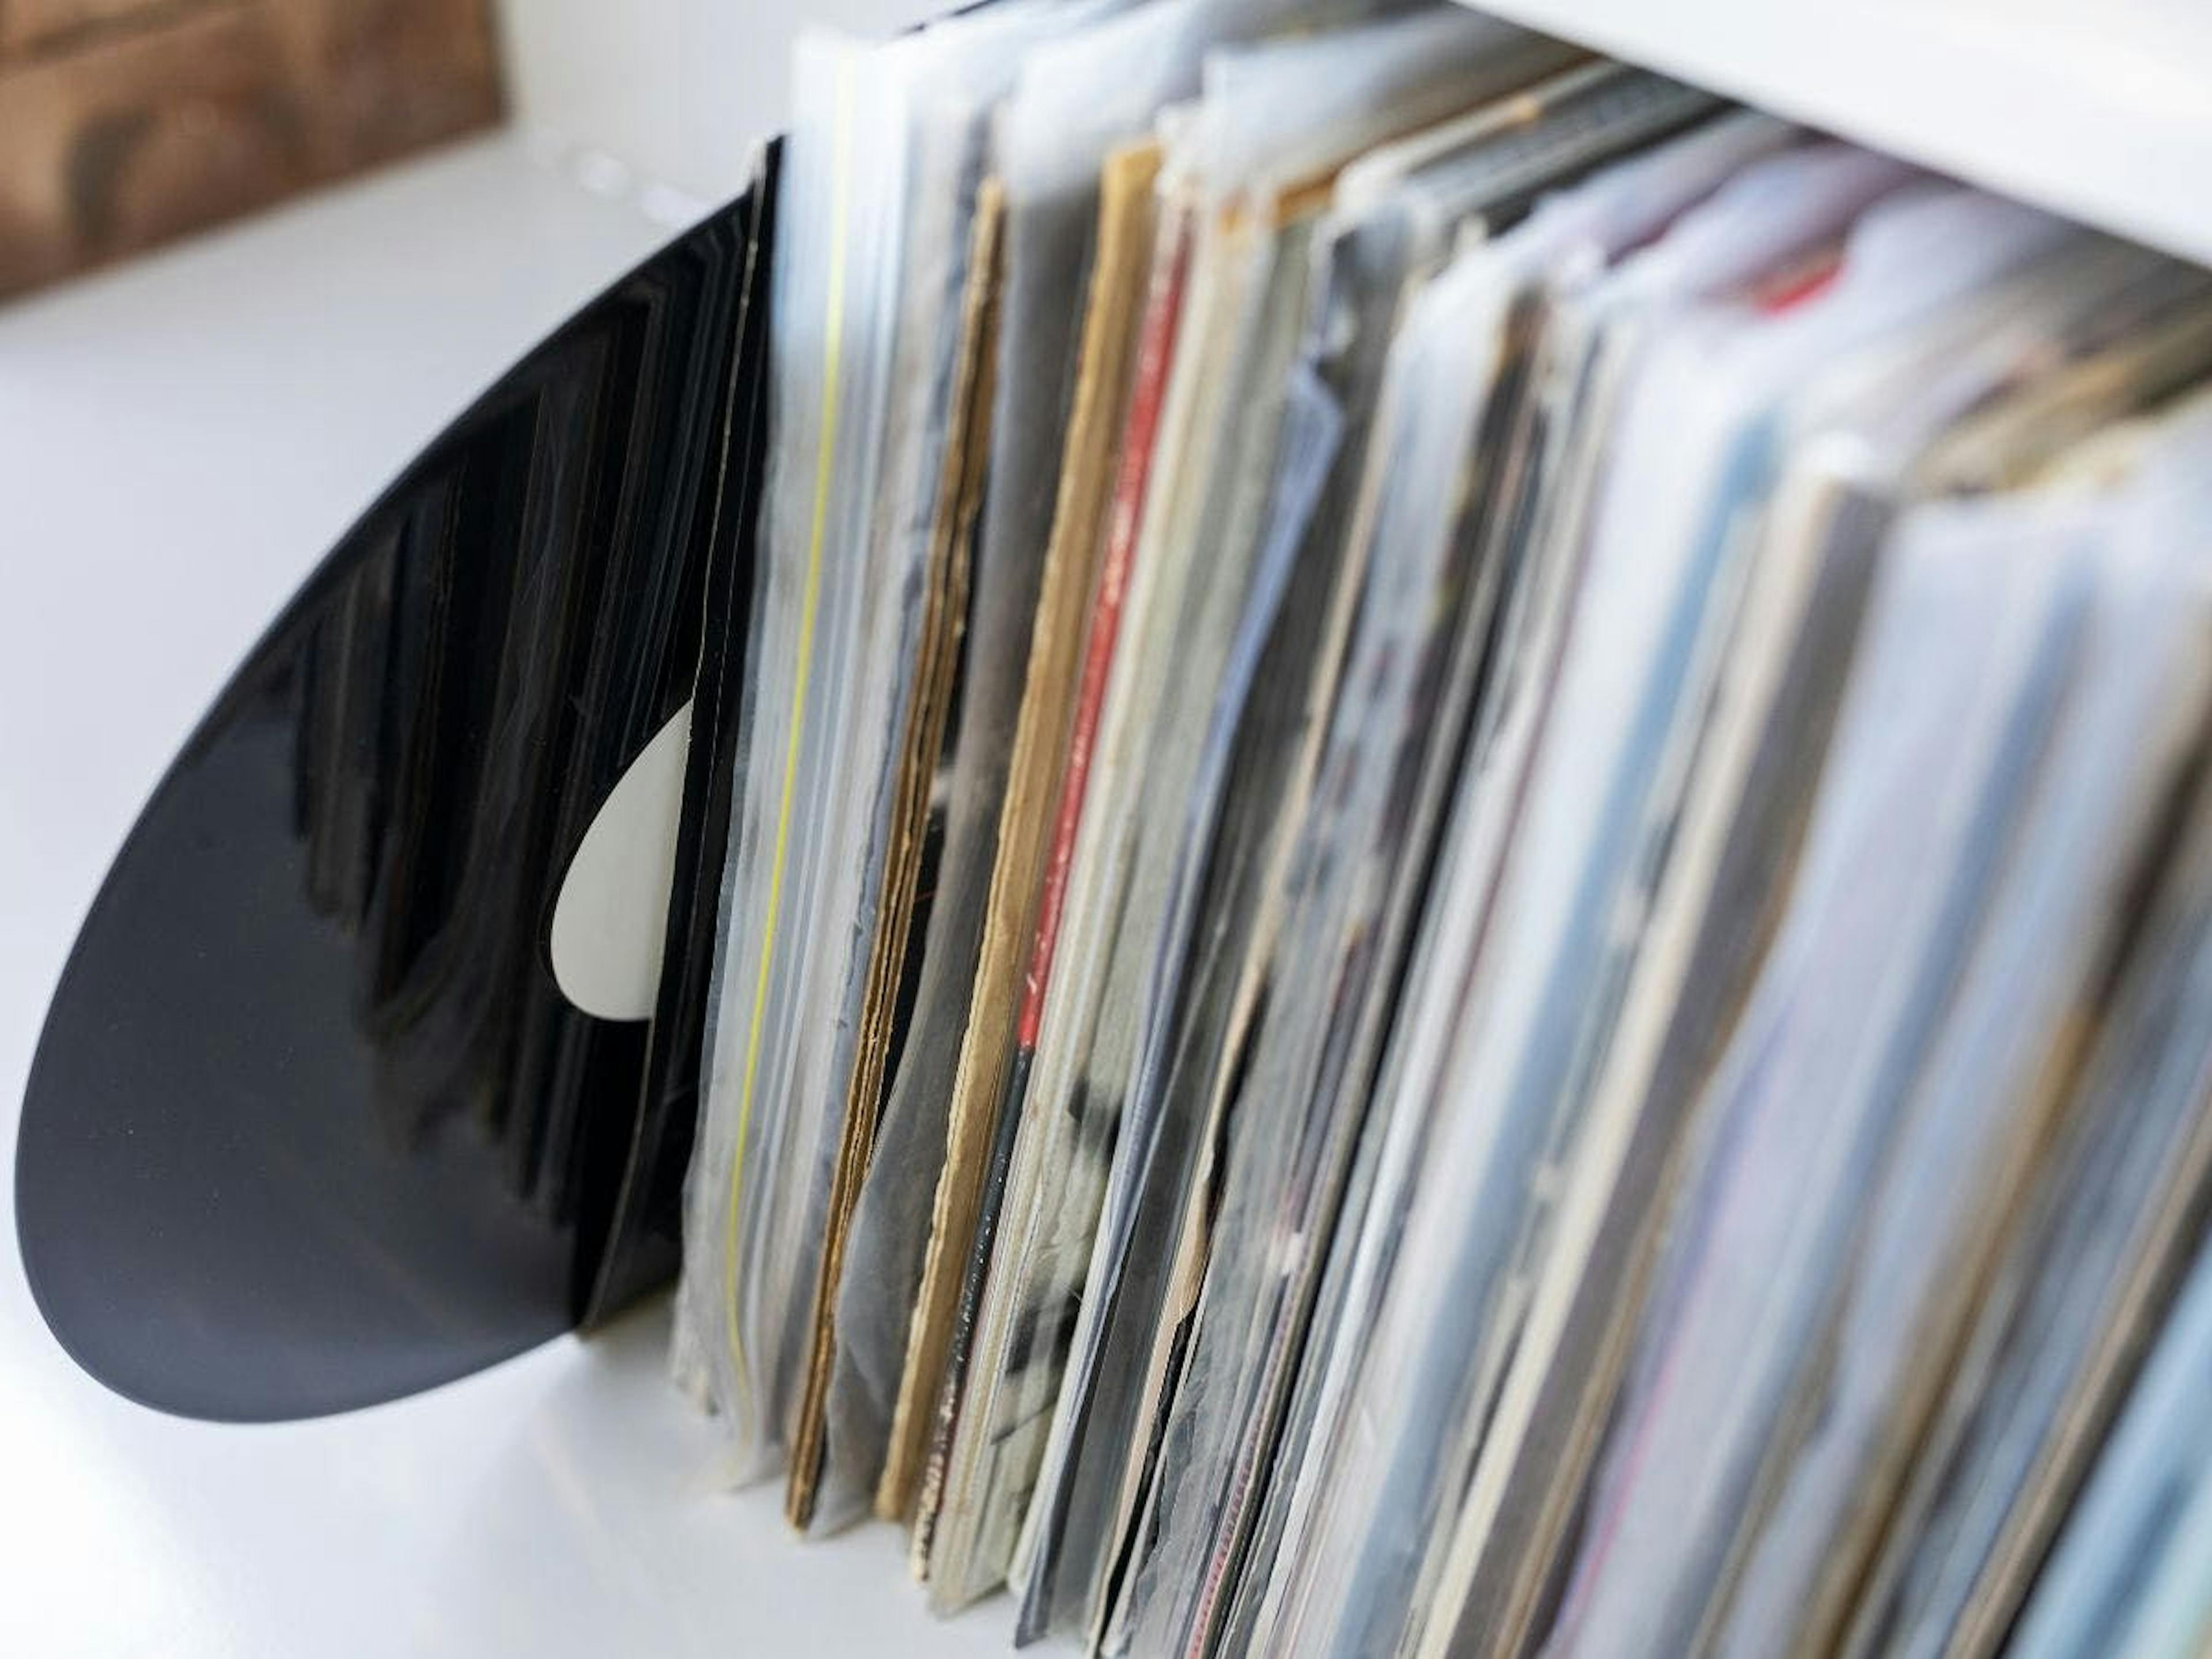 Buy vinyl LP records from the US